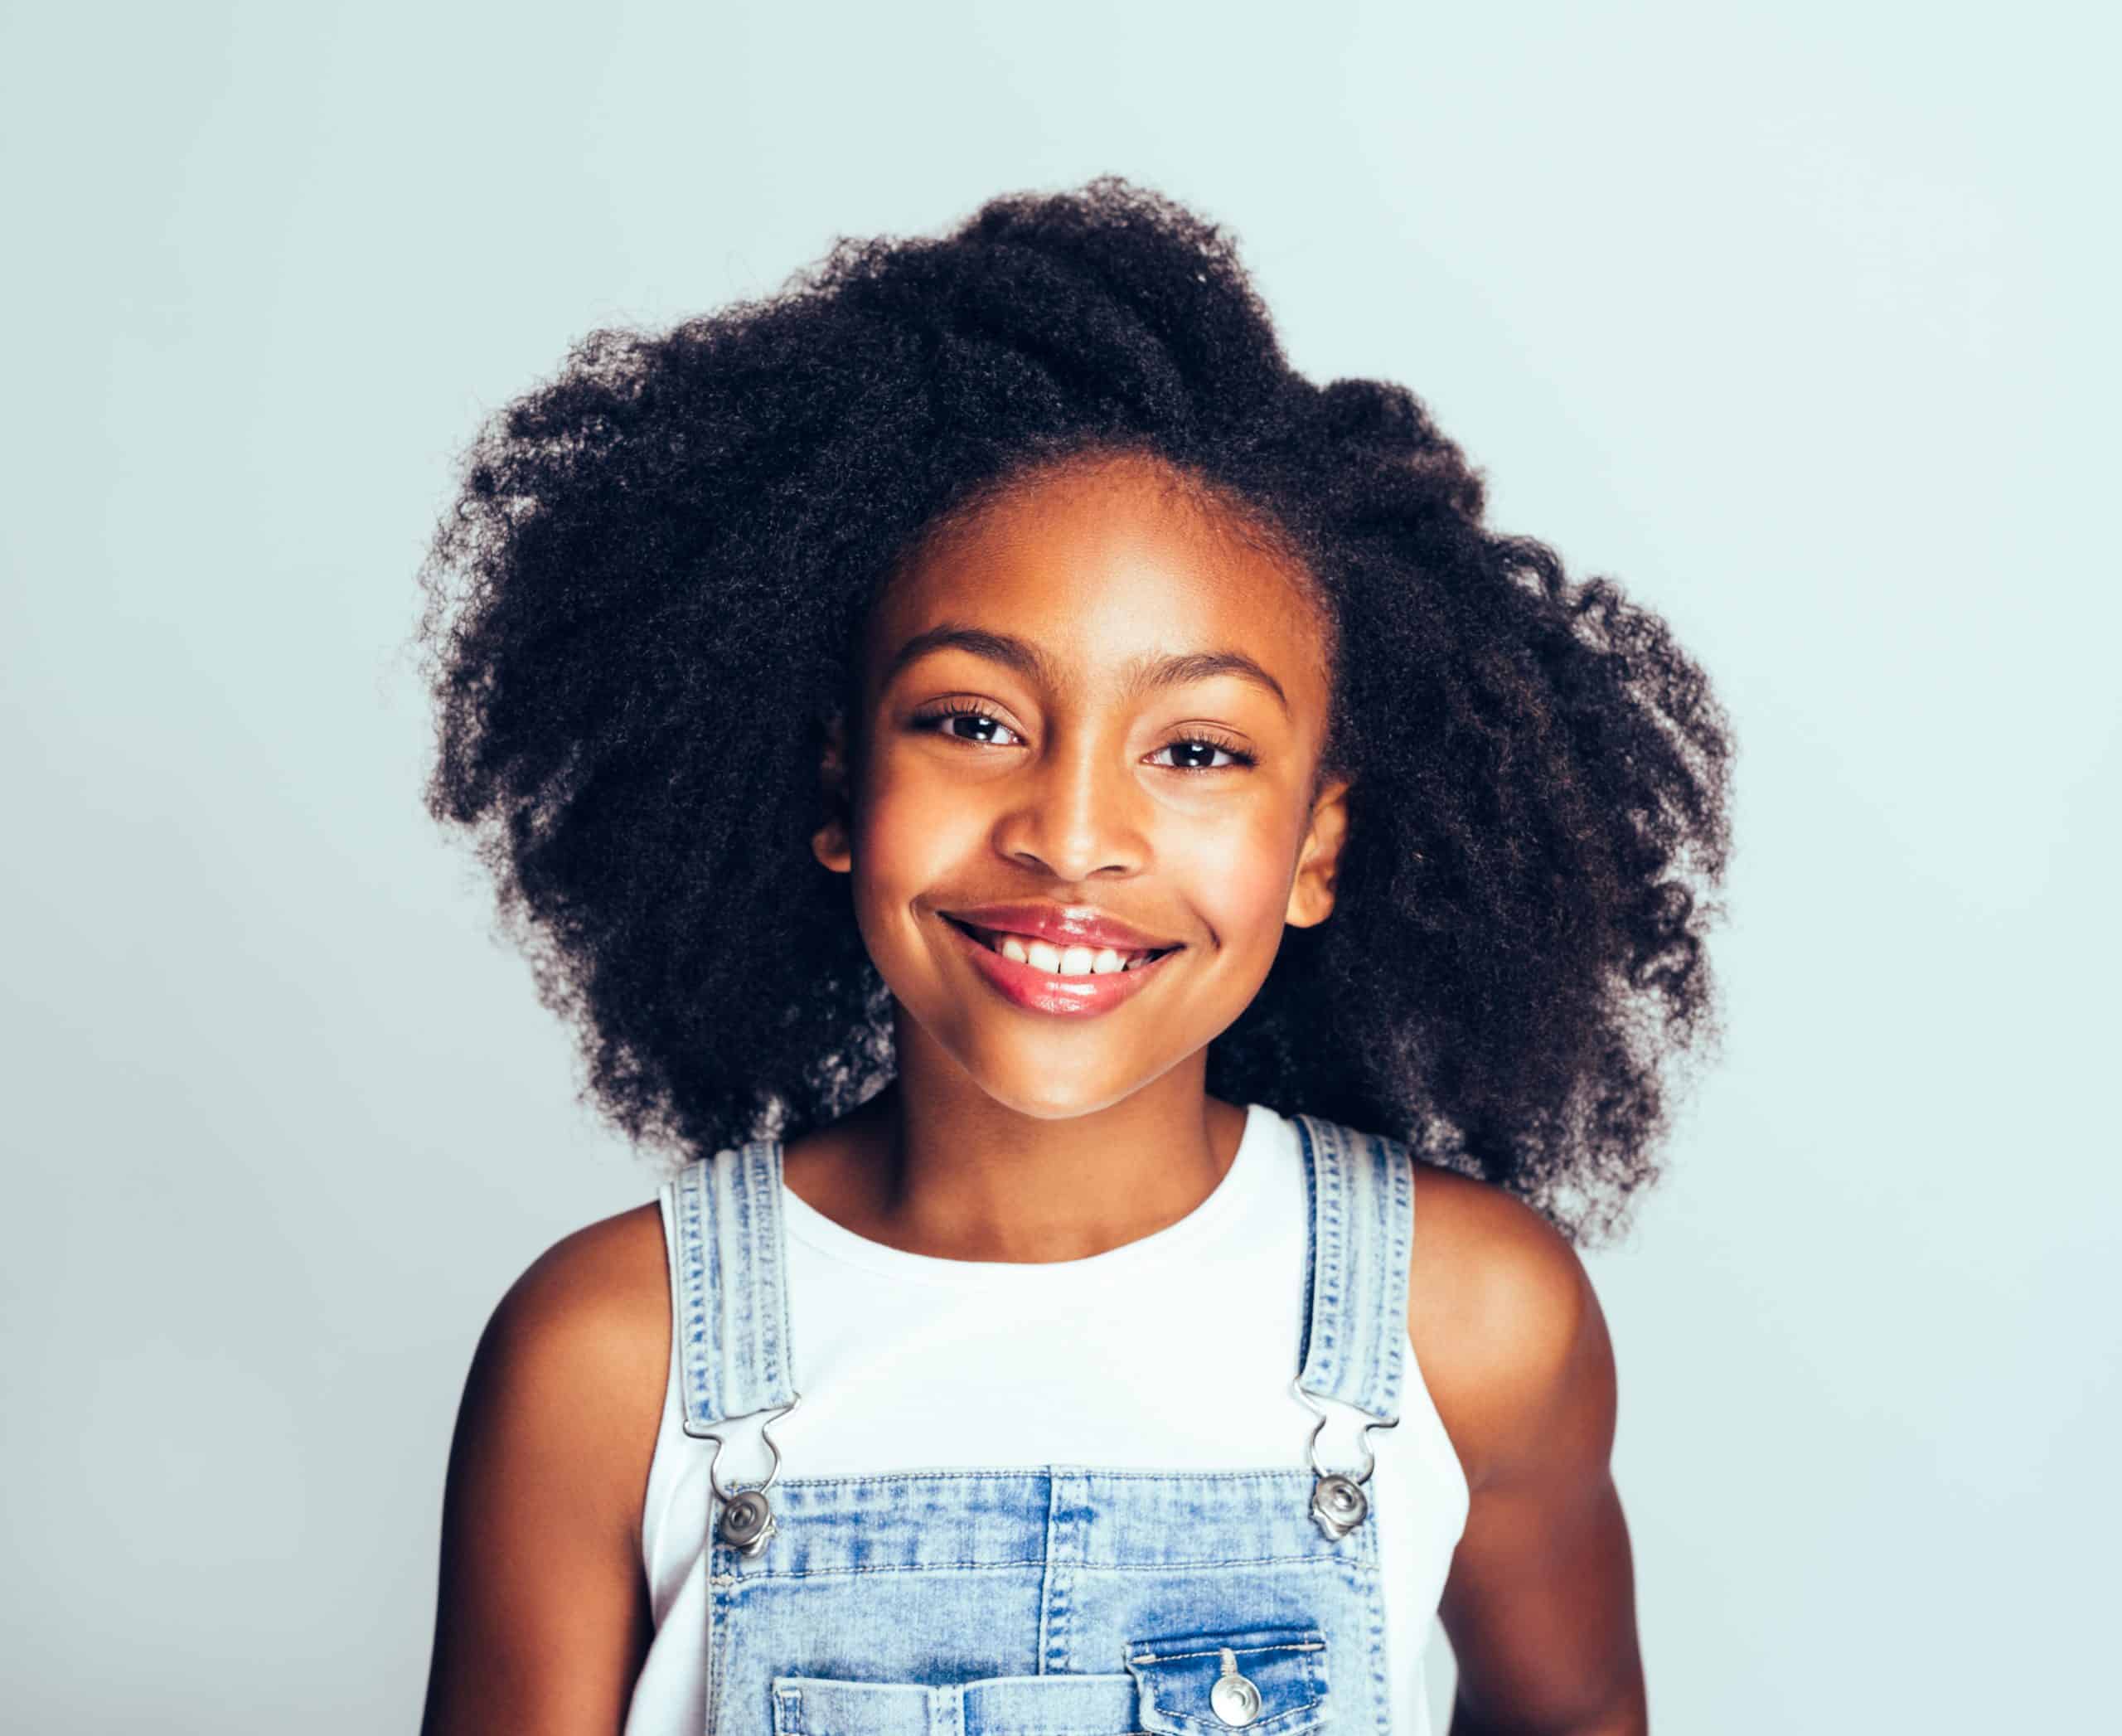 Smiling young African girl with long curly hair wearing dungarees standing happily against a gray background